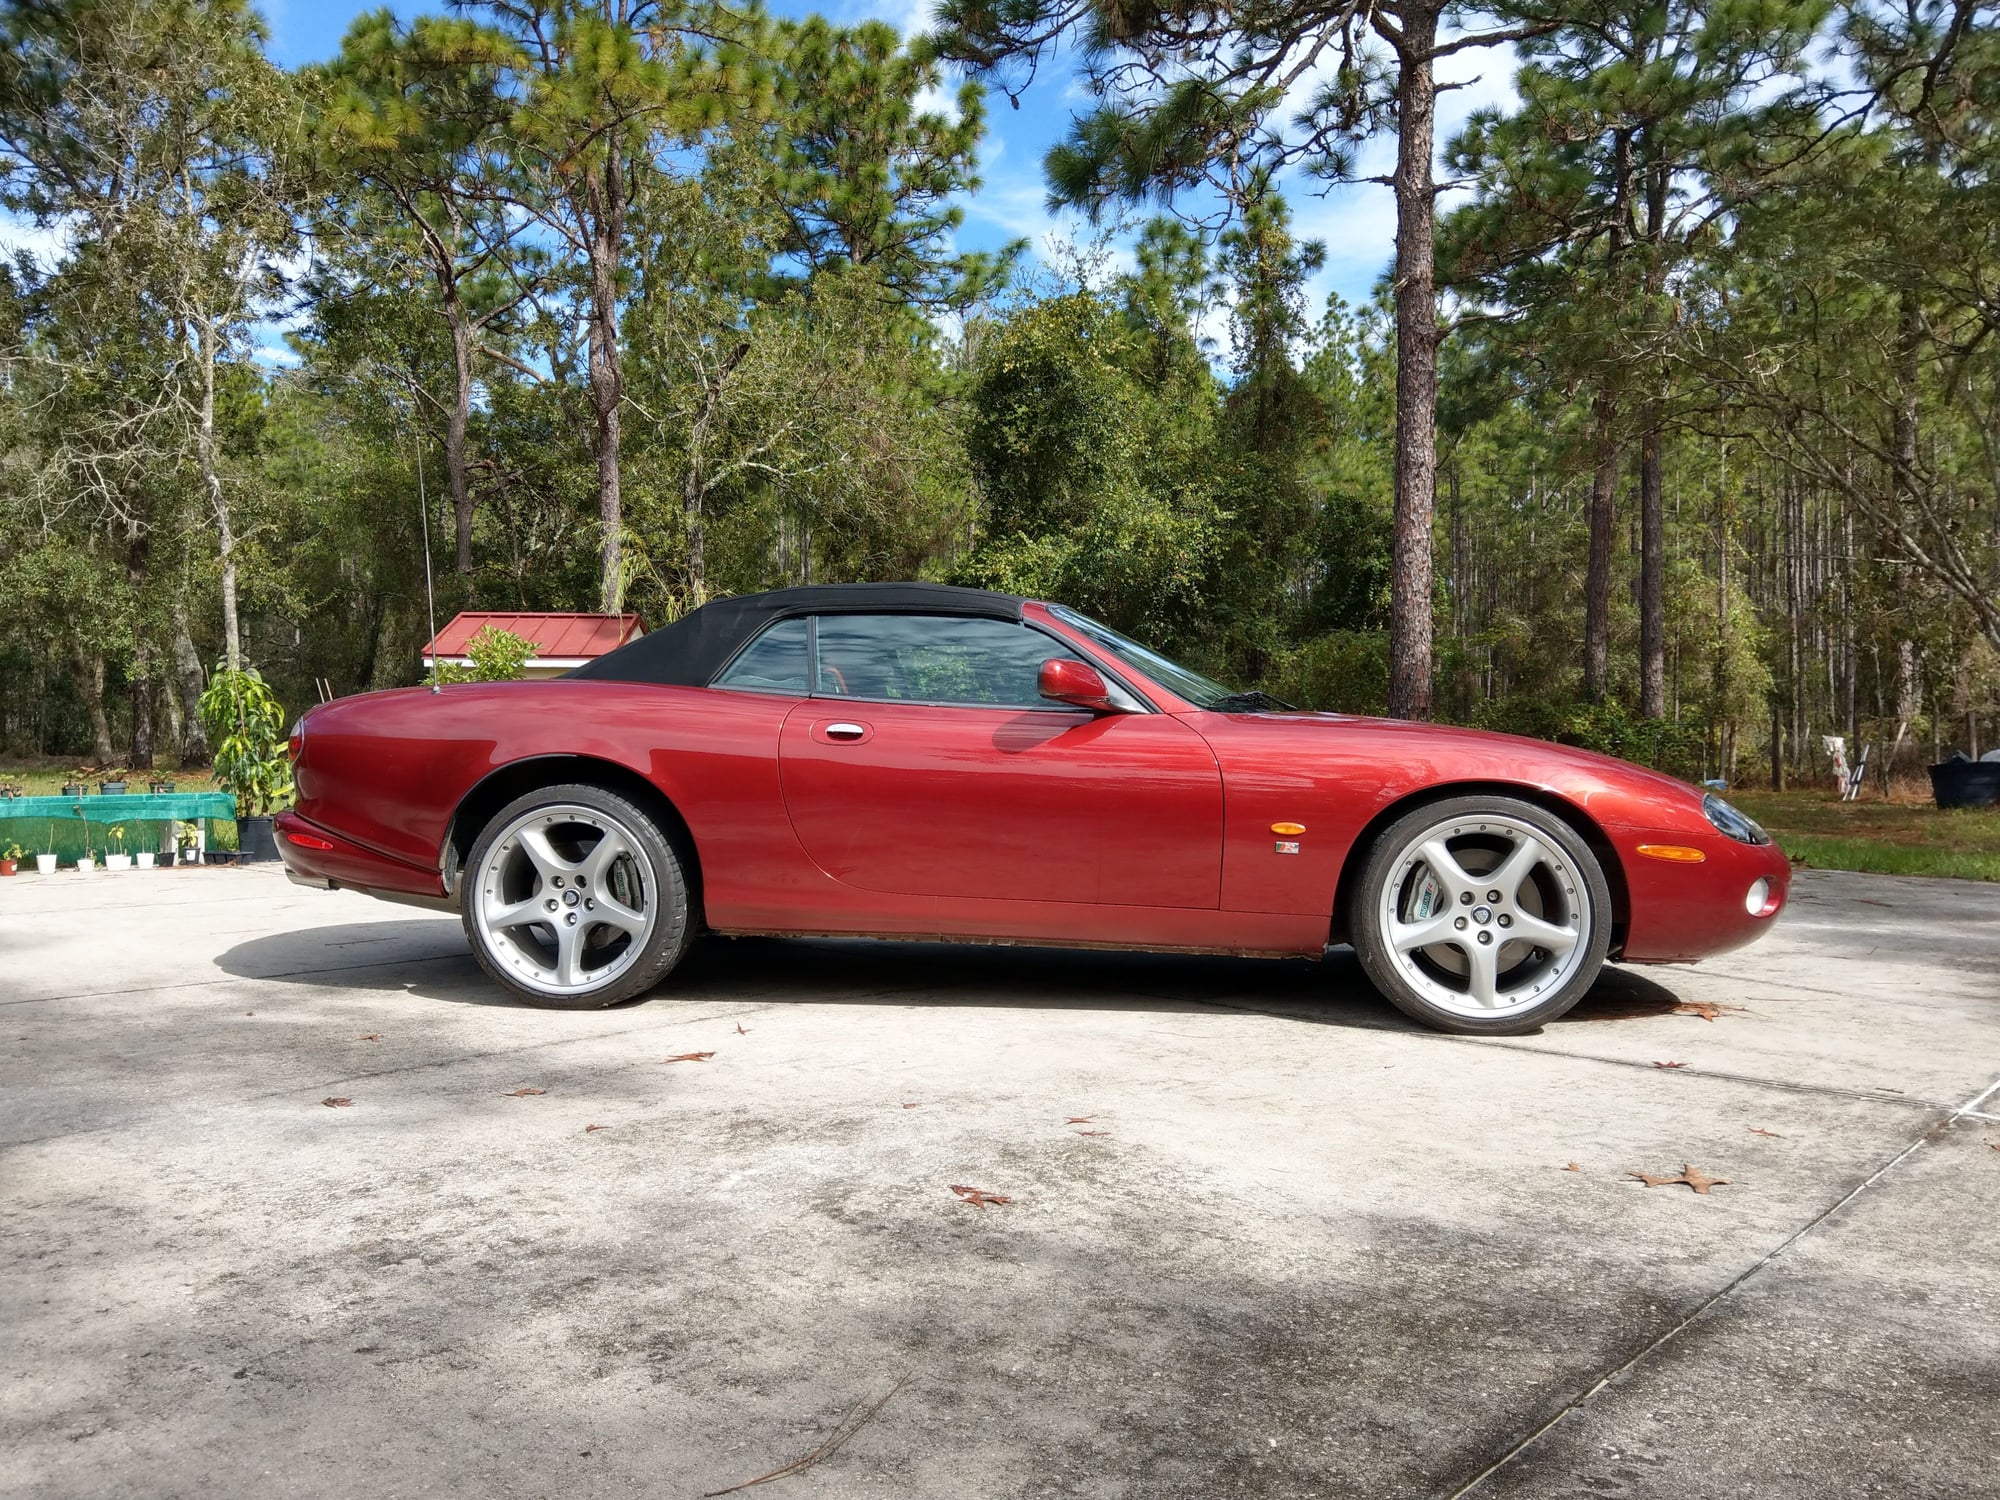 2004 Jaguar XKR - 2004 XKR Portfolio Edition - Used - VIN SAJDA42B443A38568 - 47,000 Miles - 8 cyl - 2WD - Automatic - Convertible - Red - Hudson, FL 34669, United States